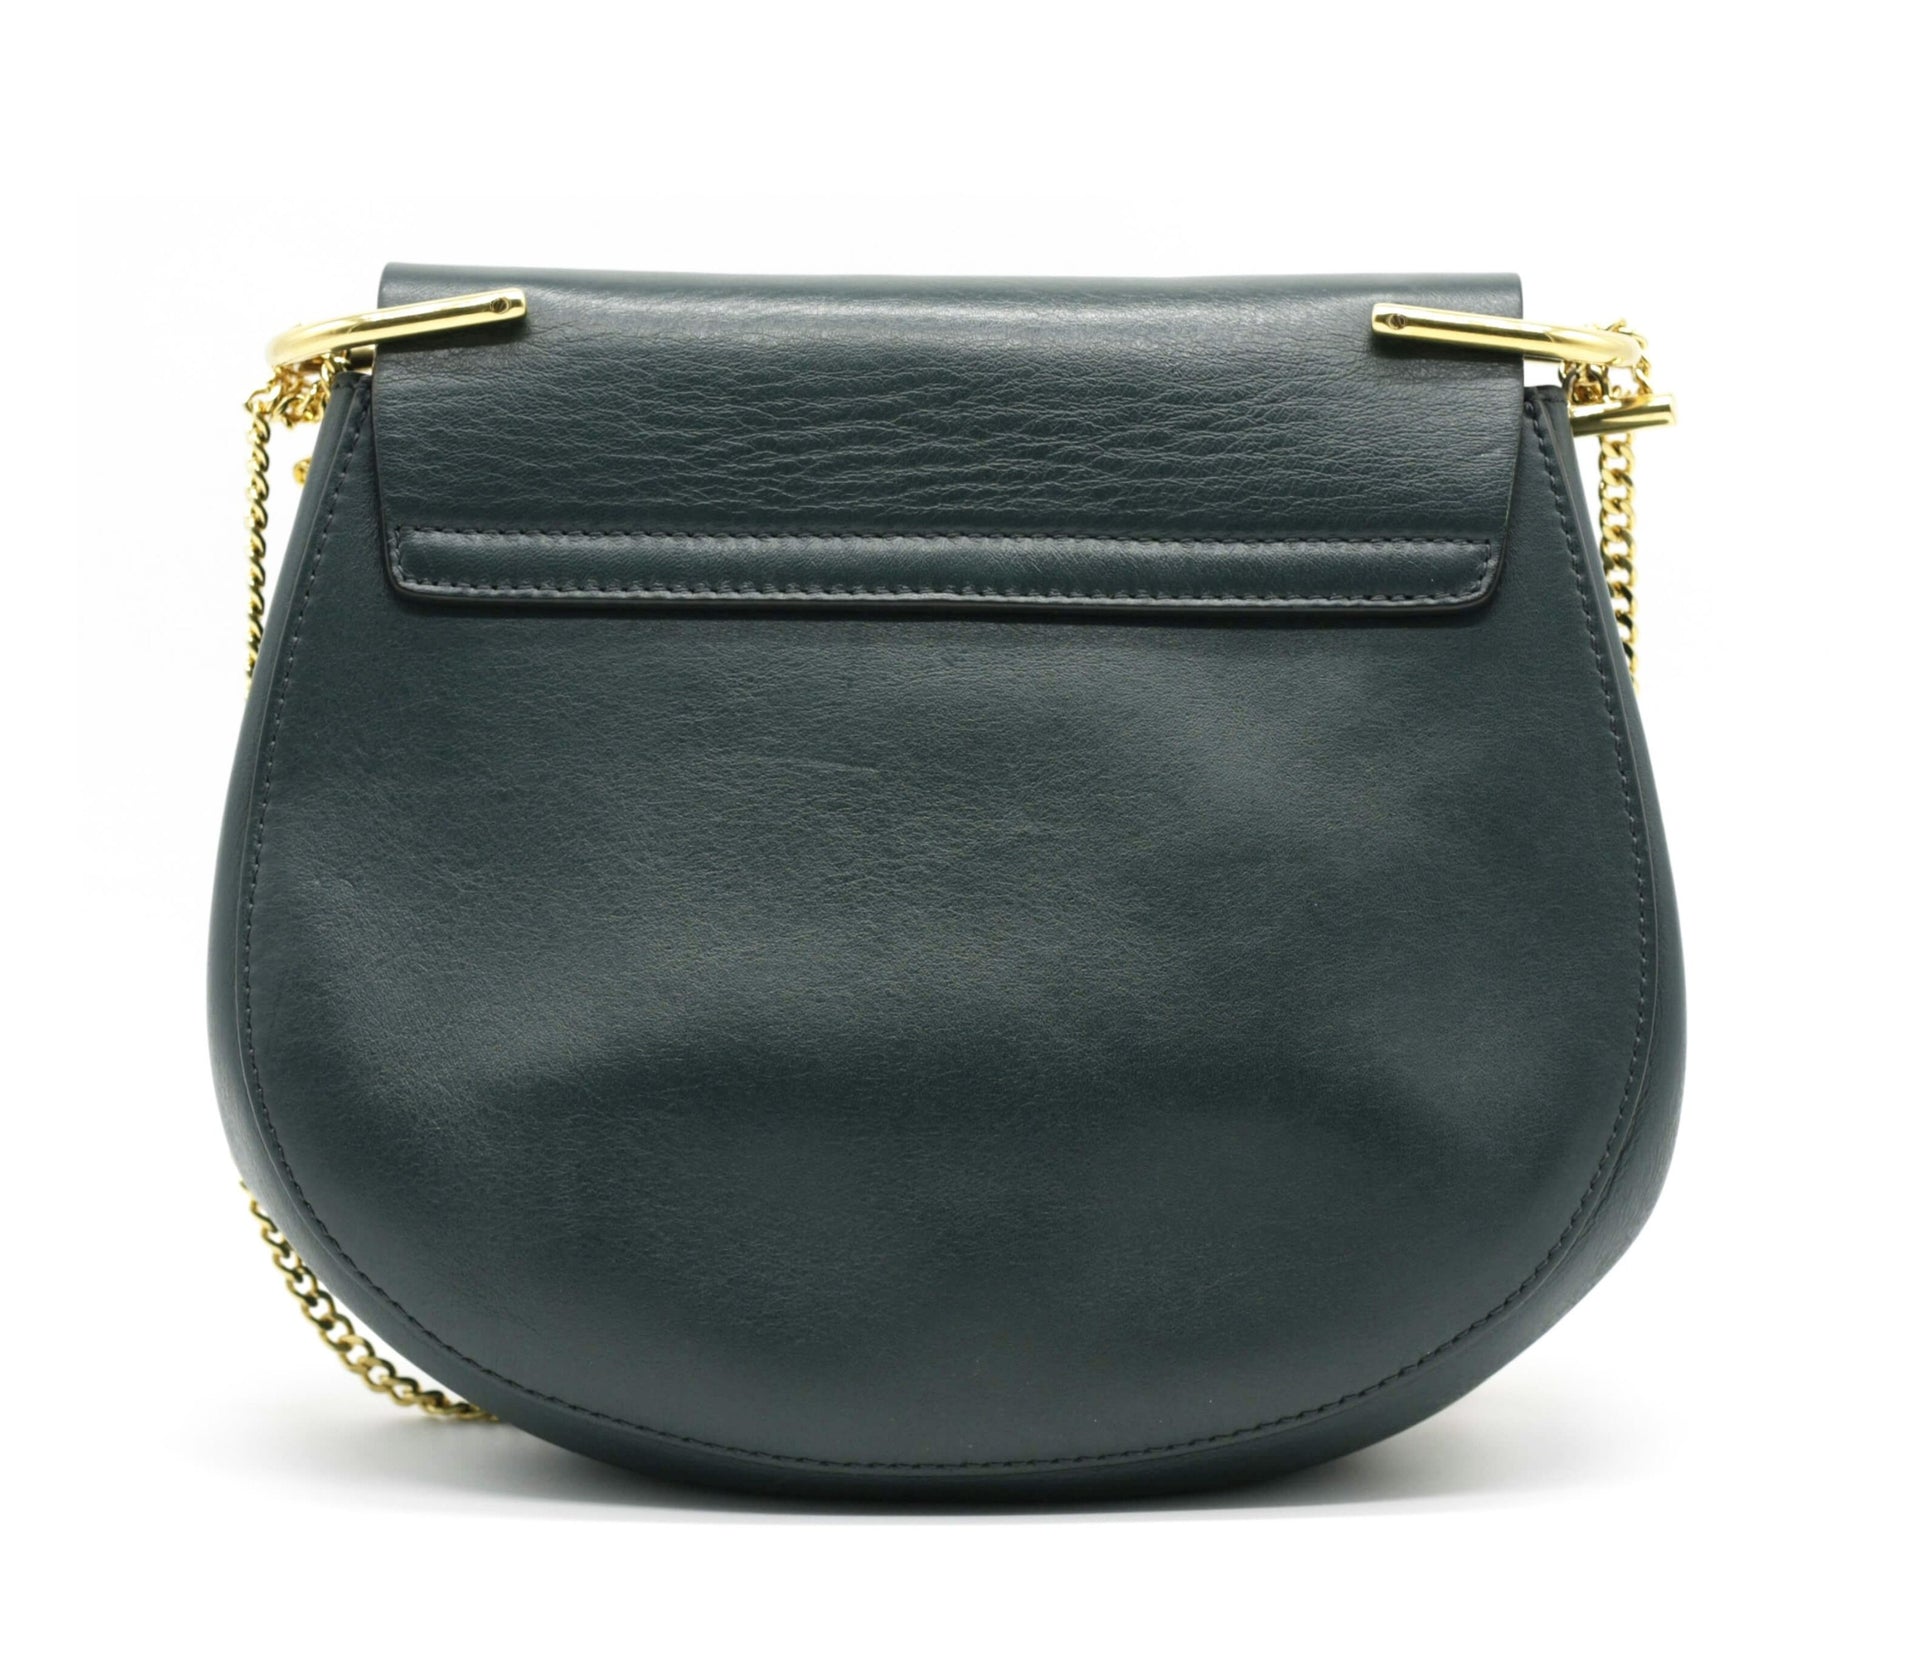 Chole Intense Green Drew saddle bag in pony and calfskin